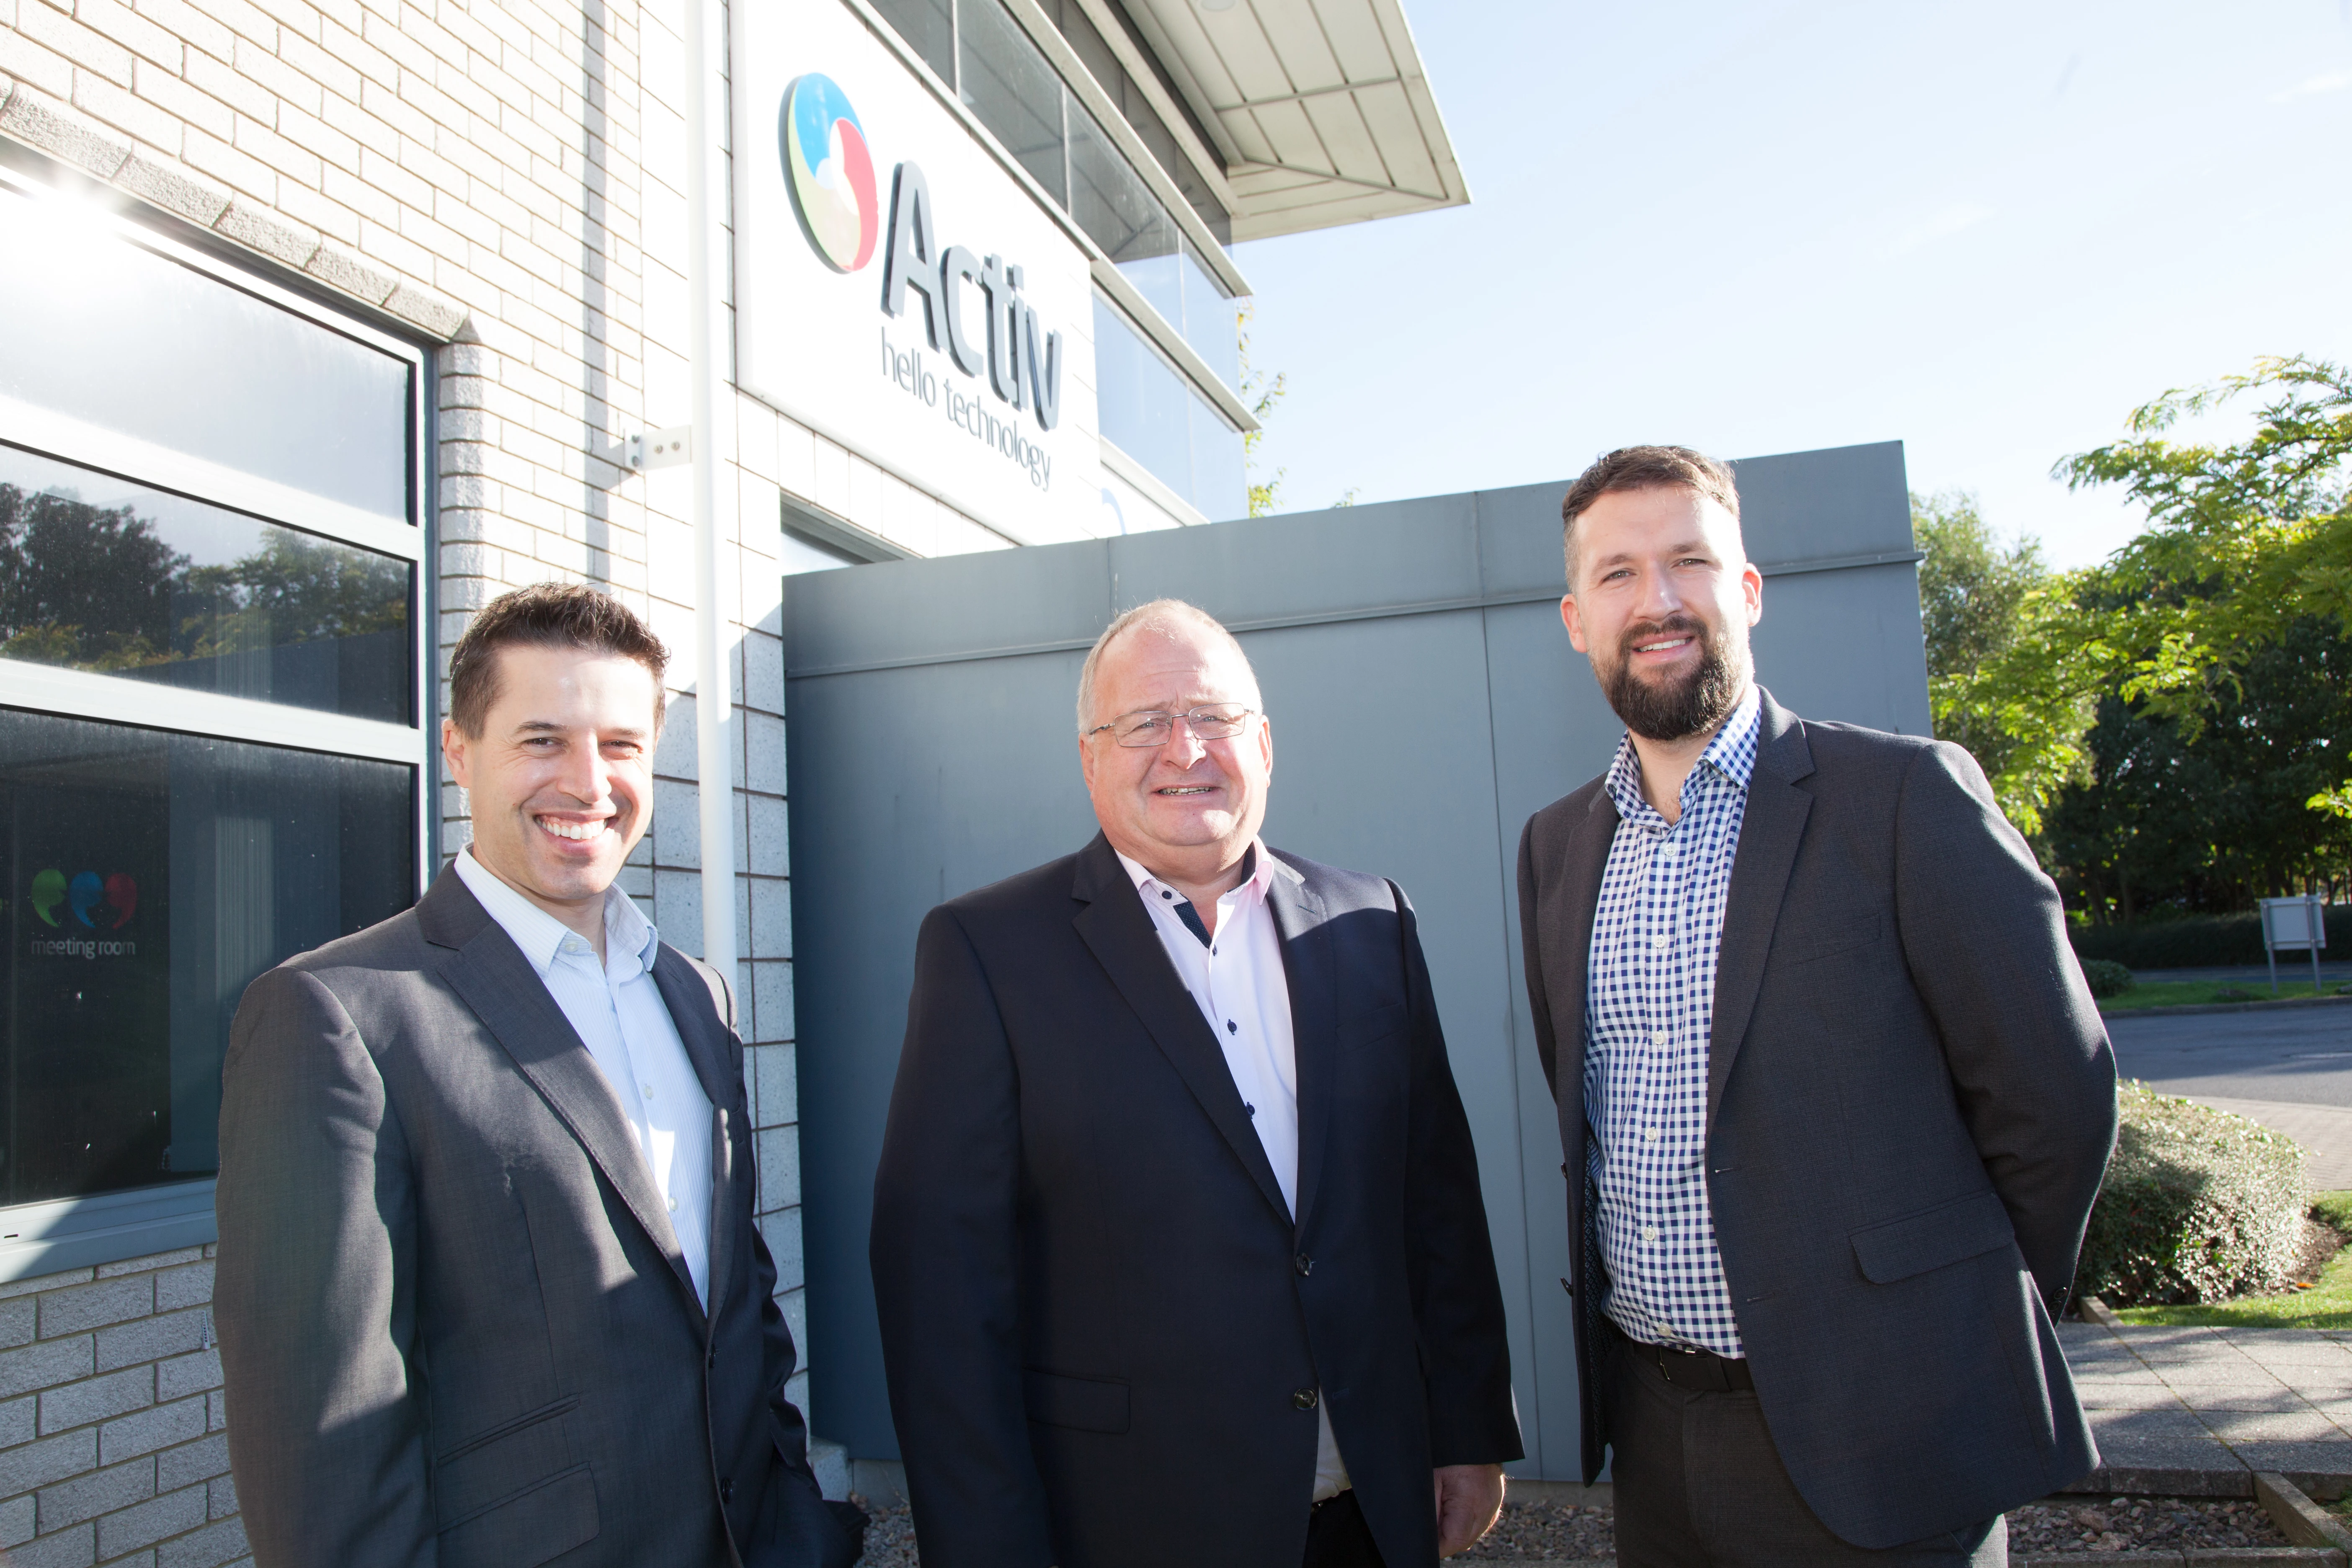 Finance manager, Michael Hearns, managing director, Ian Gillespie and sales manager, Dean Cowens. 